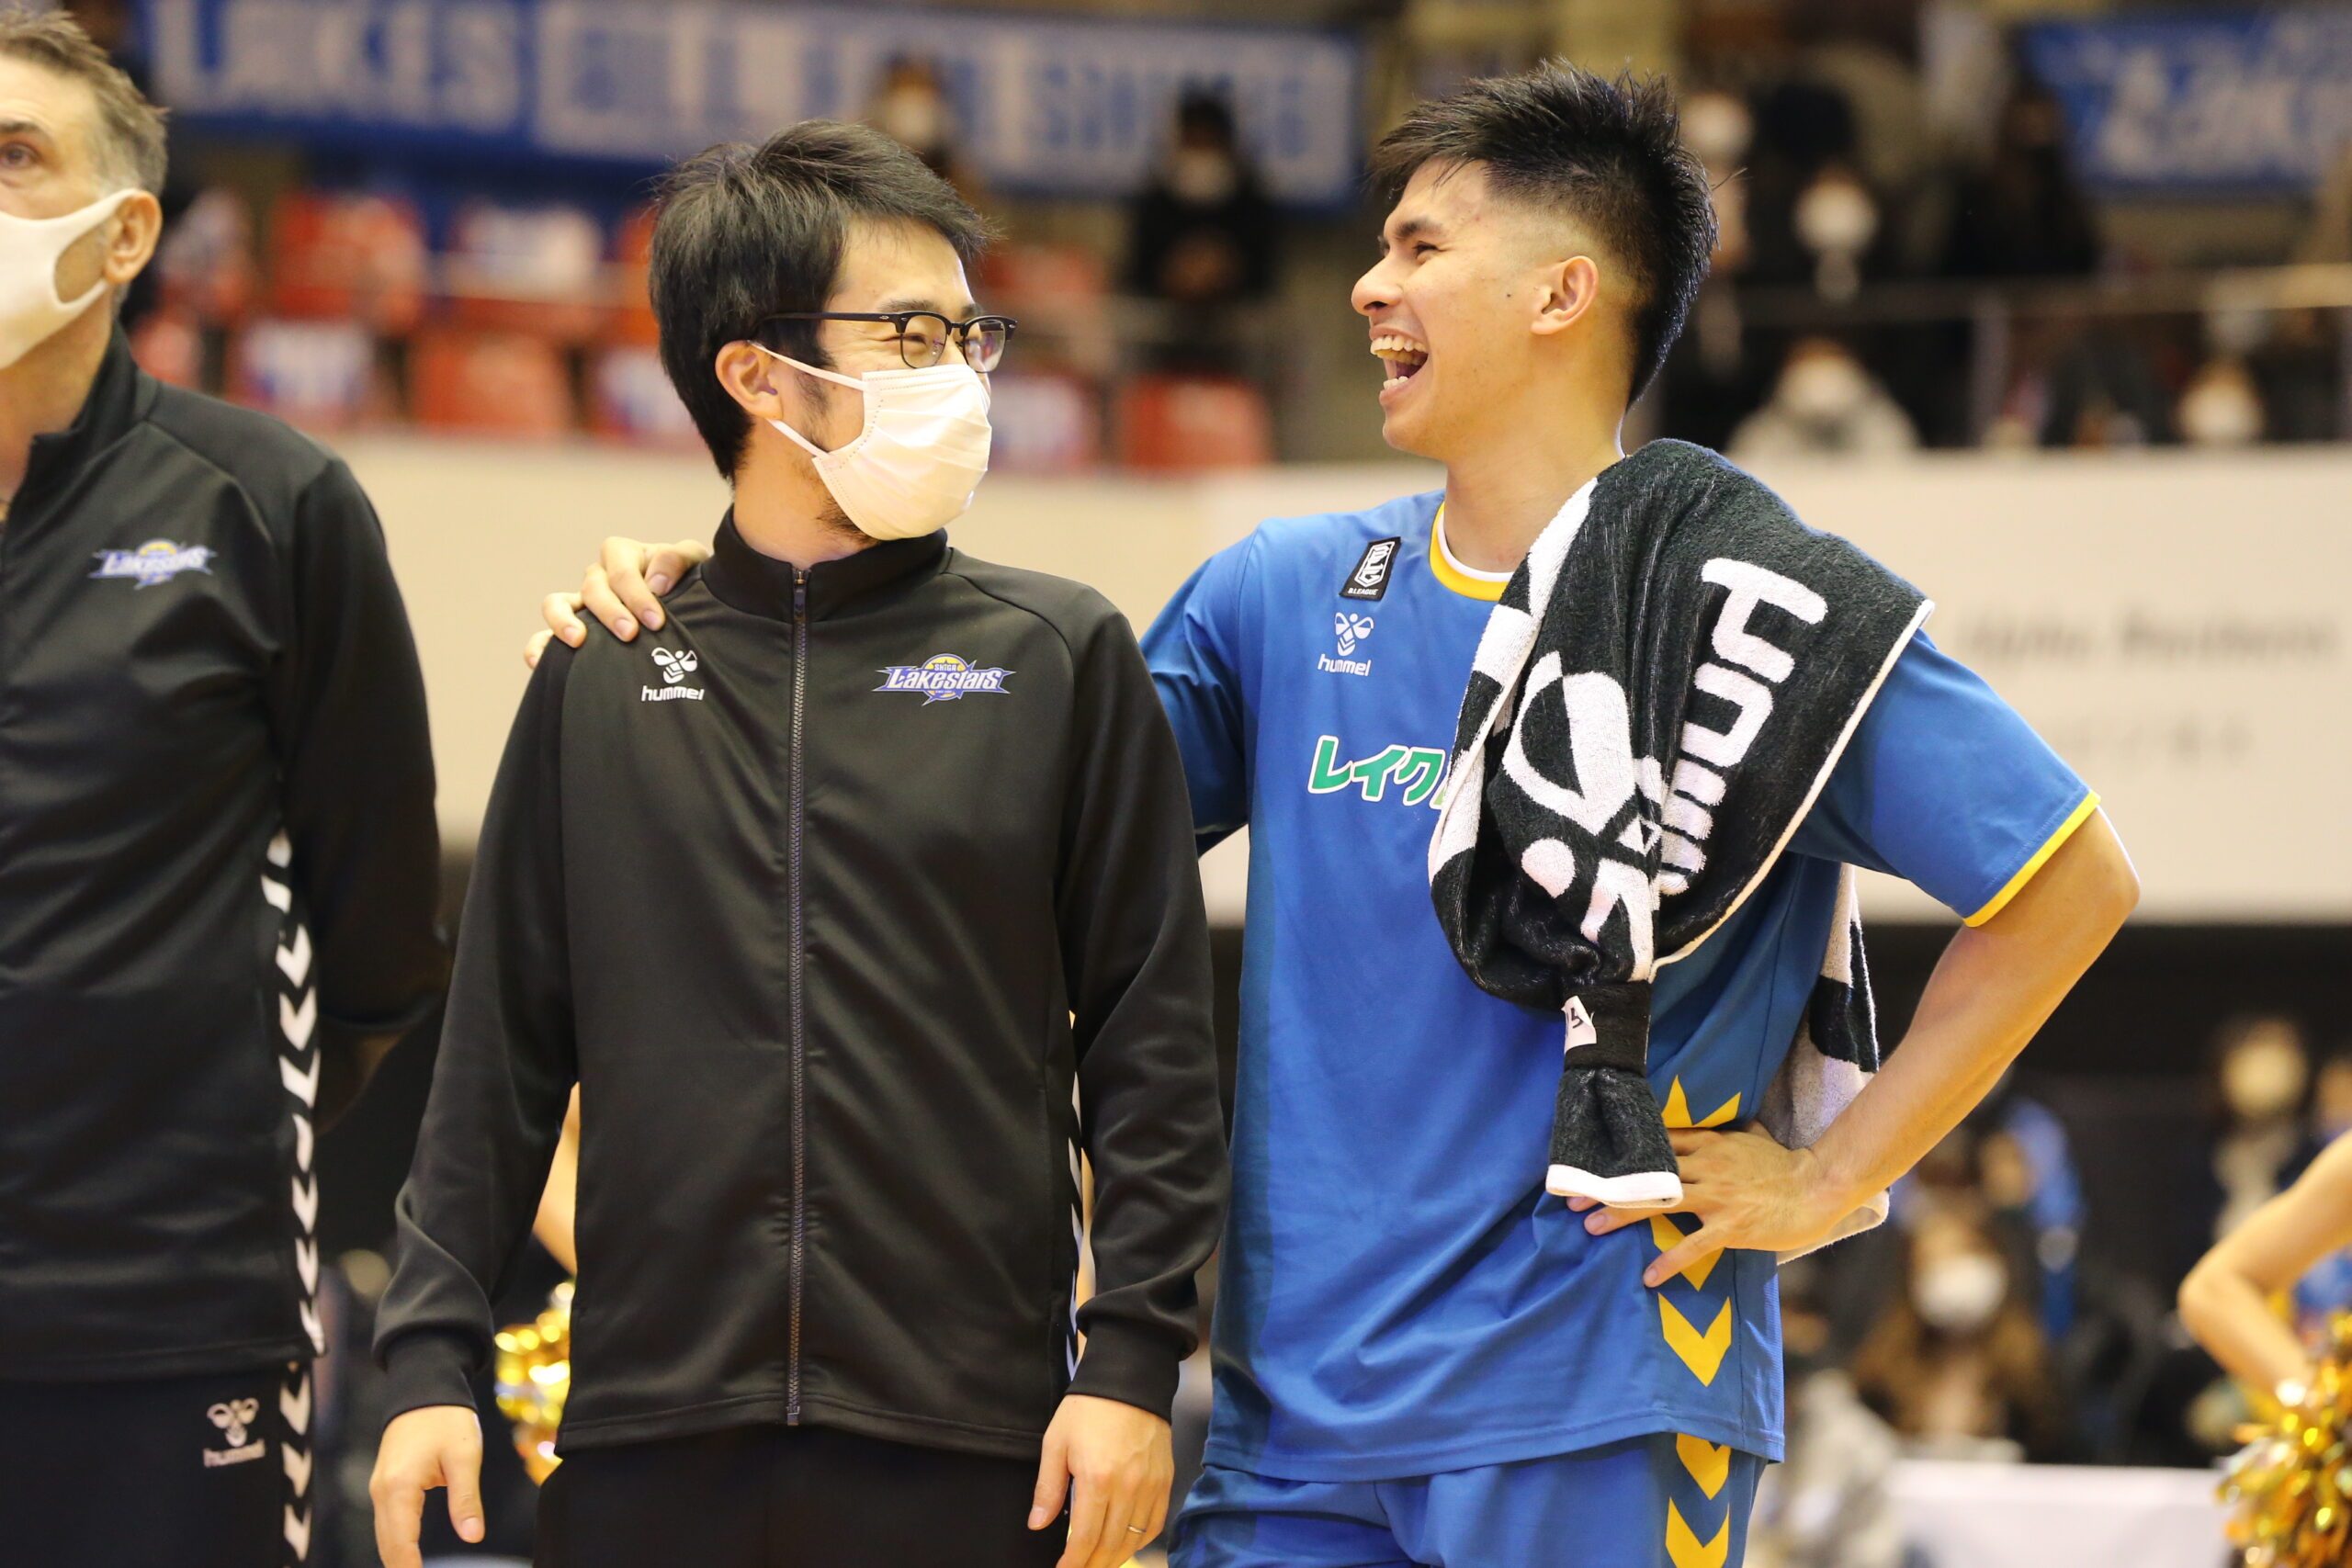 Kiefer Ravena lauded by Shiga for Typhoon Odette relief initiative